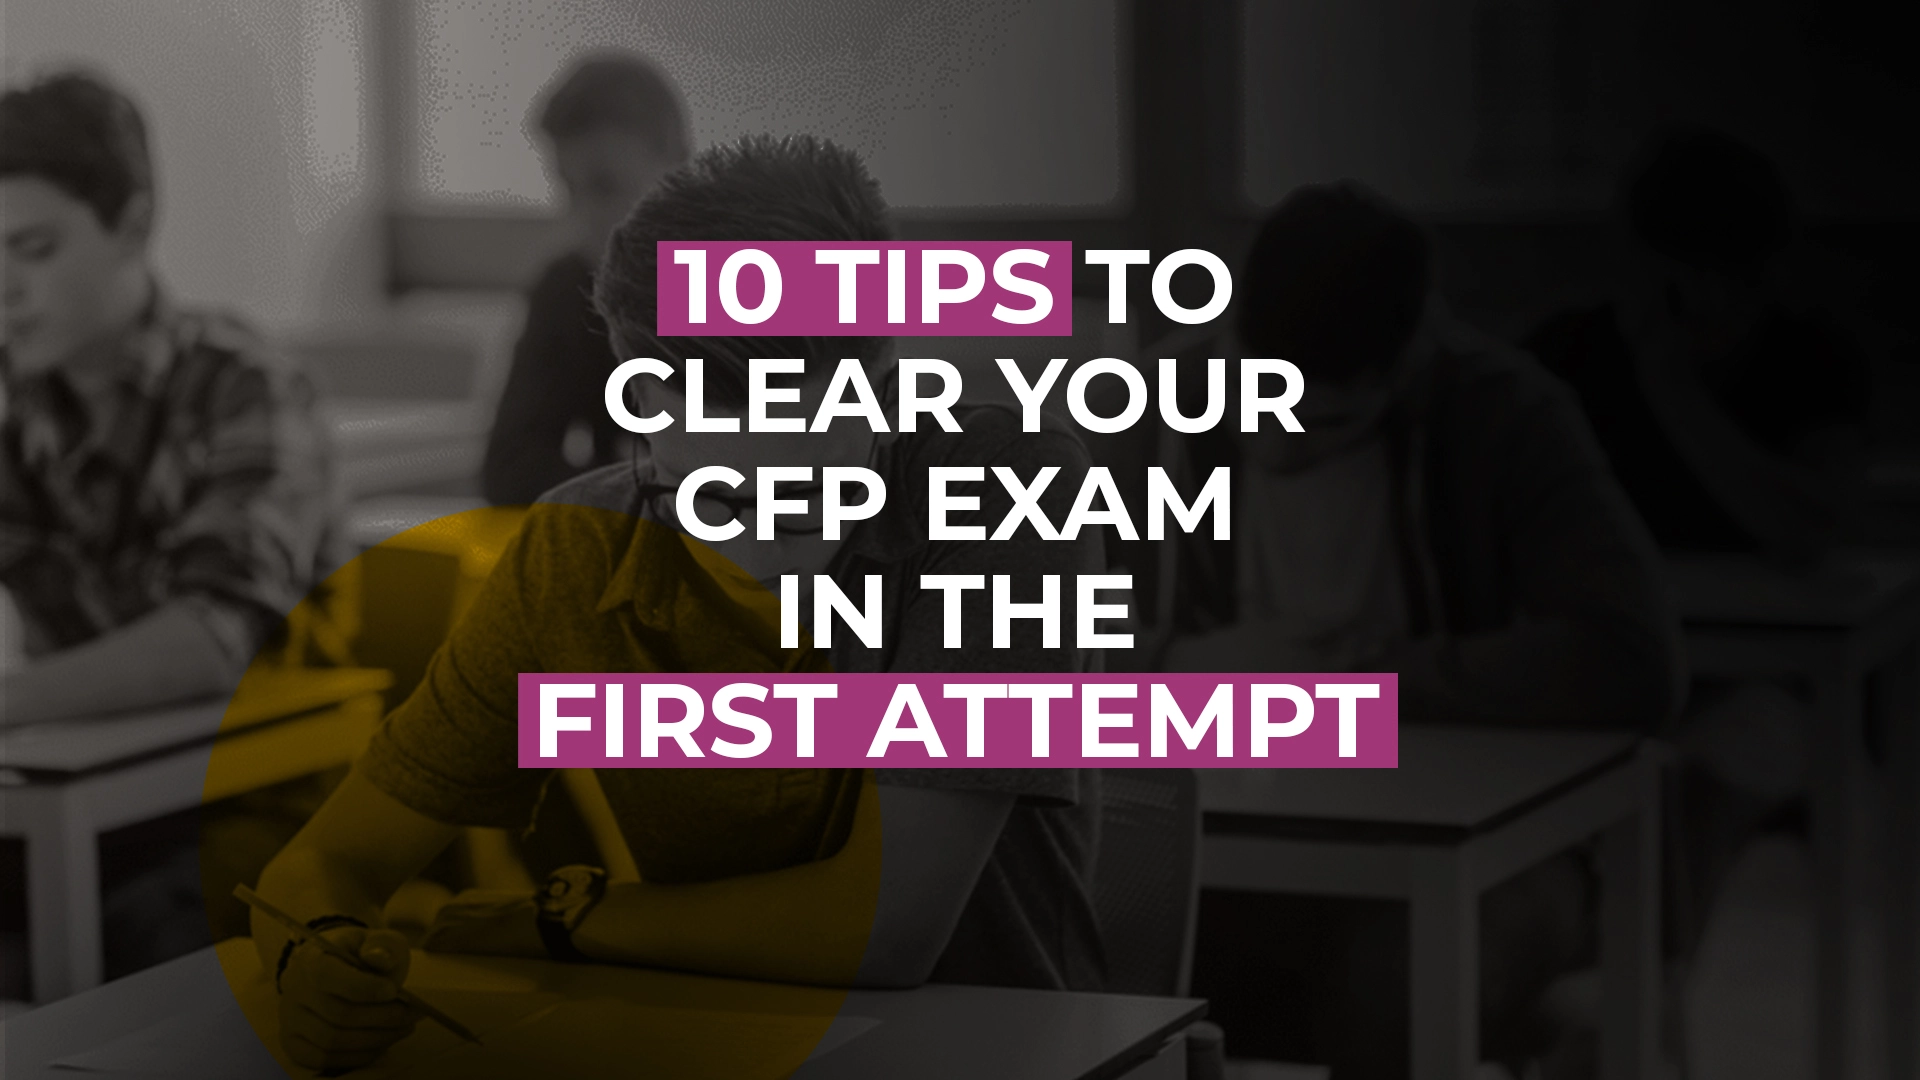 10 tips to clear your CFP exam in the first attempt